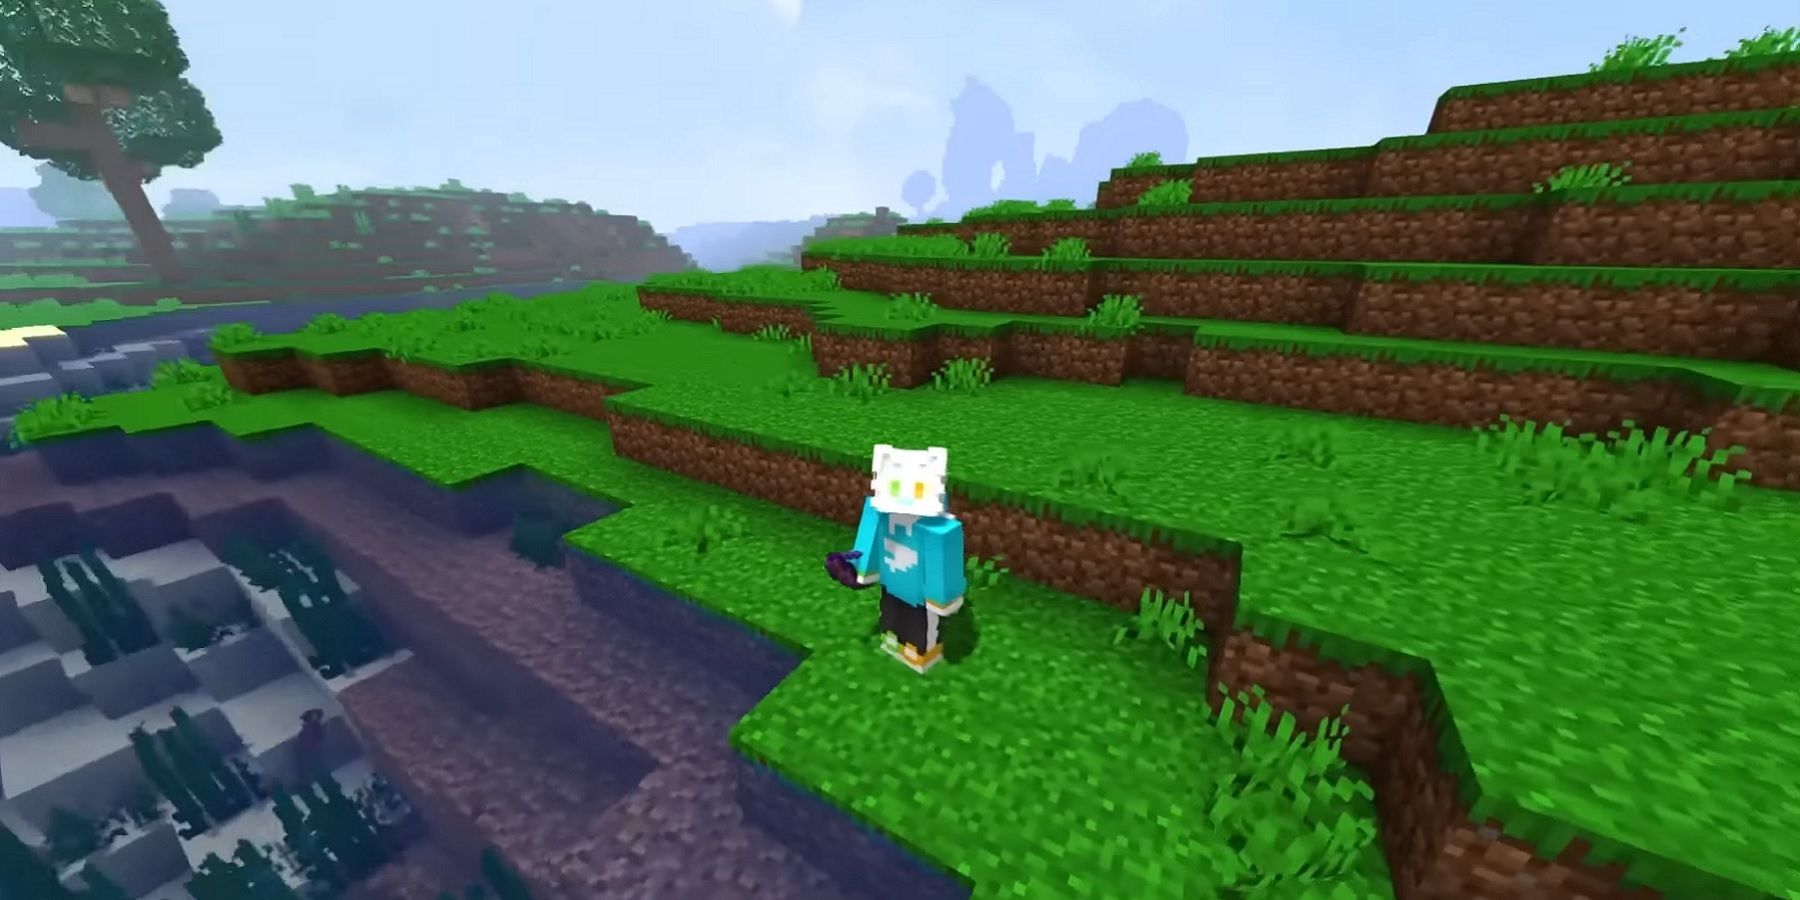 An image from Minecraft showing the YouTuber Mysticat's avatar in the game.